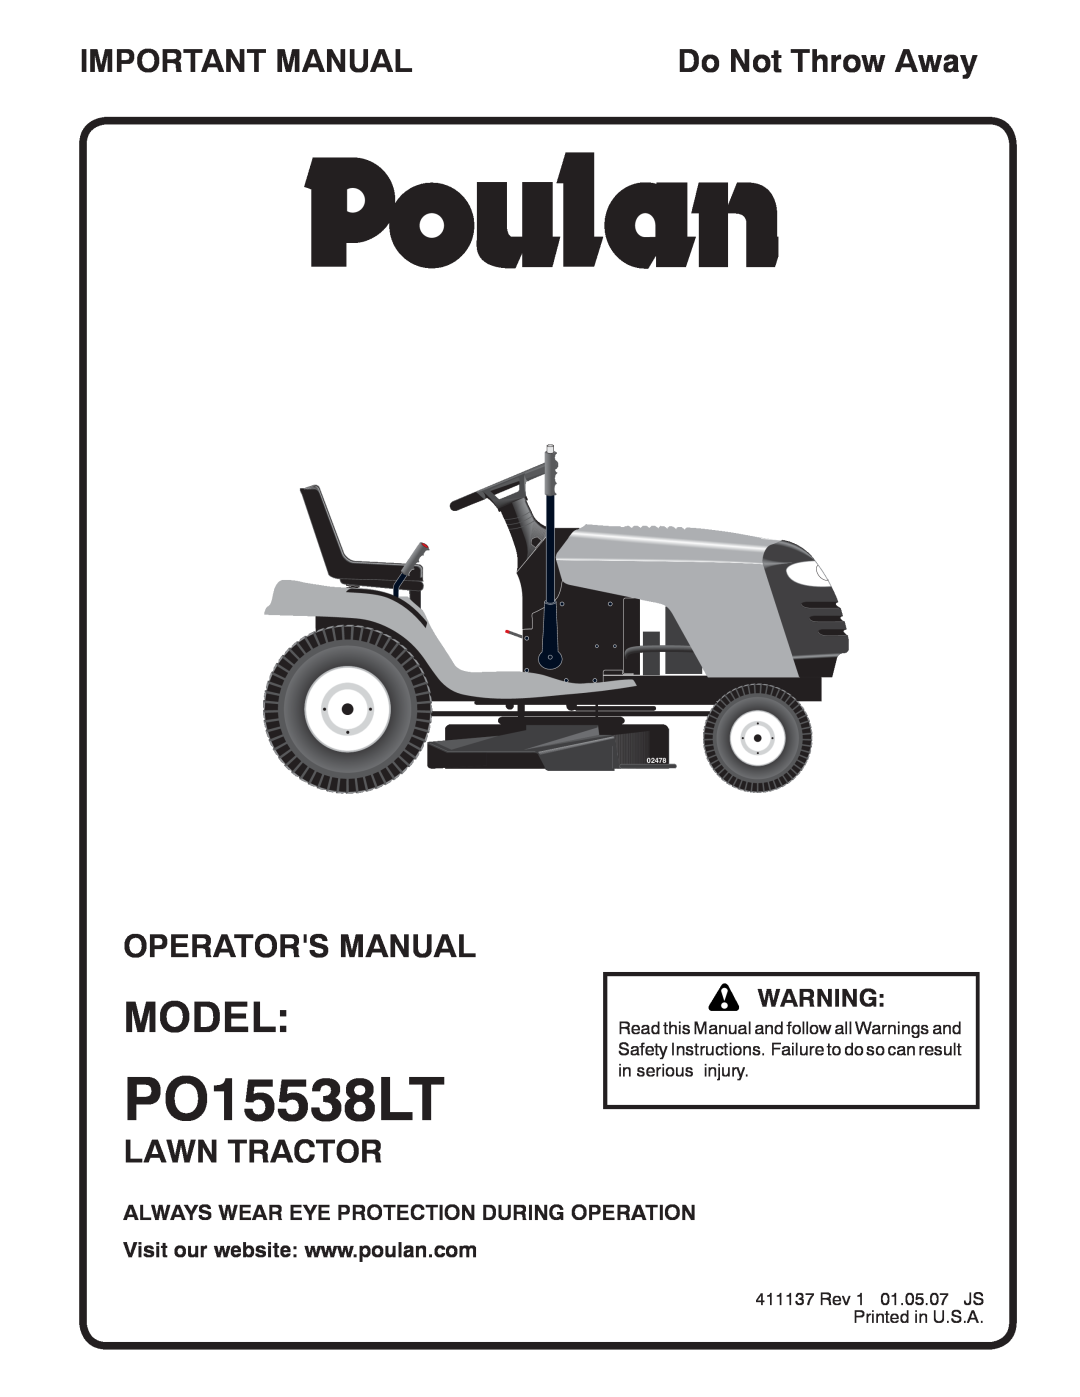 Poulan 960120068 manual Model, Important Manual, Operators Manual, Lawn Tractor, Do Not Throw Away, PO15538LT, 02478 